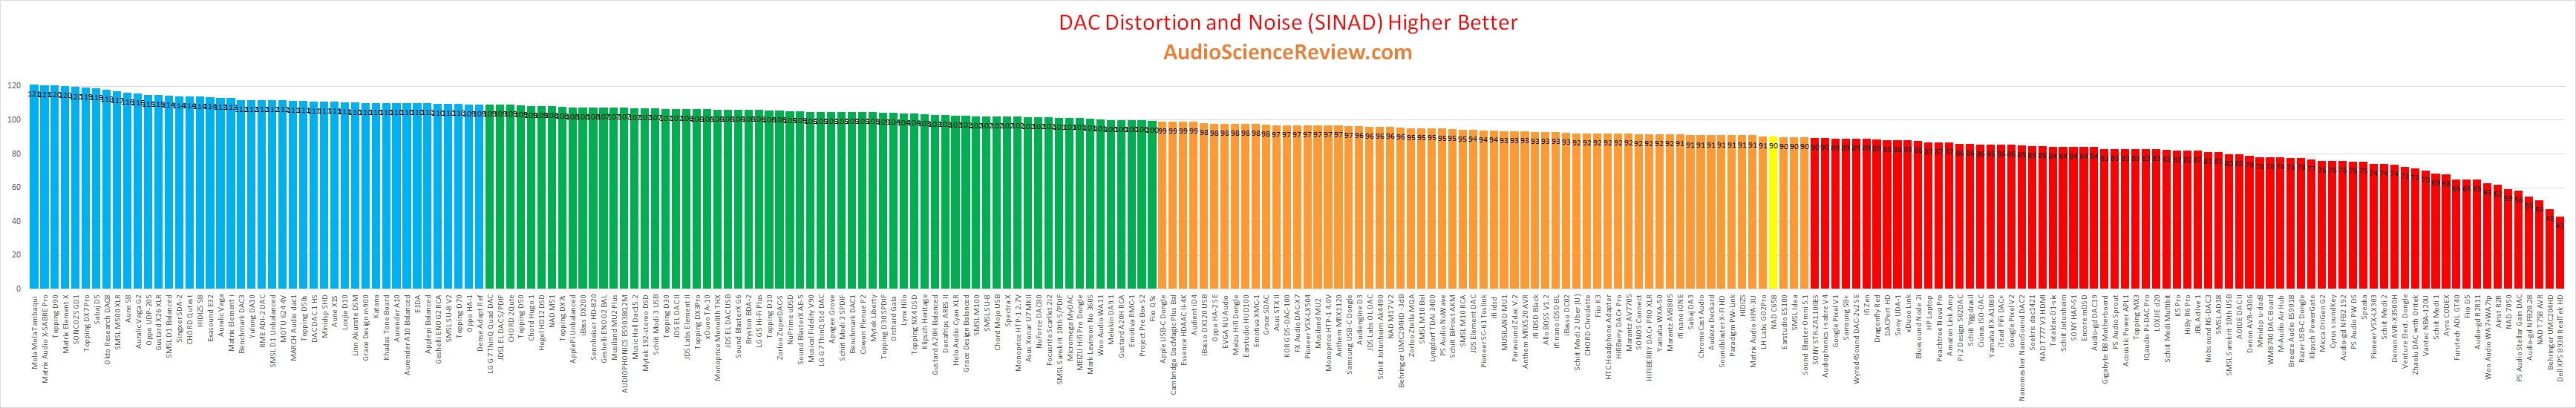 Best streaming DAC review 2020.png